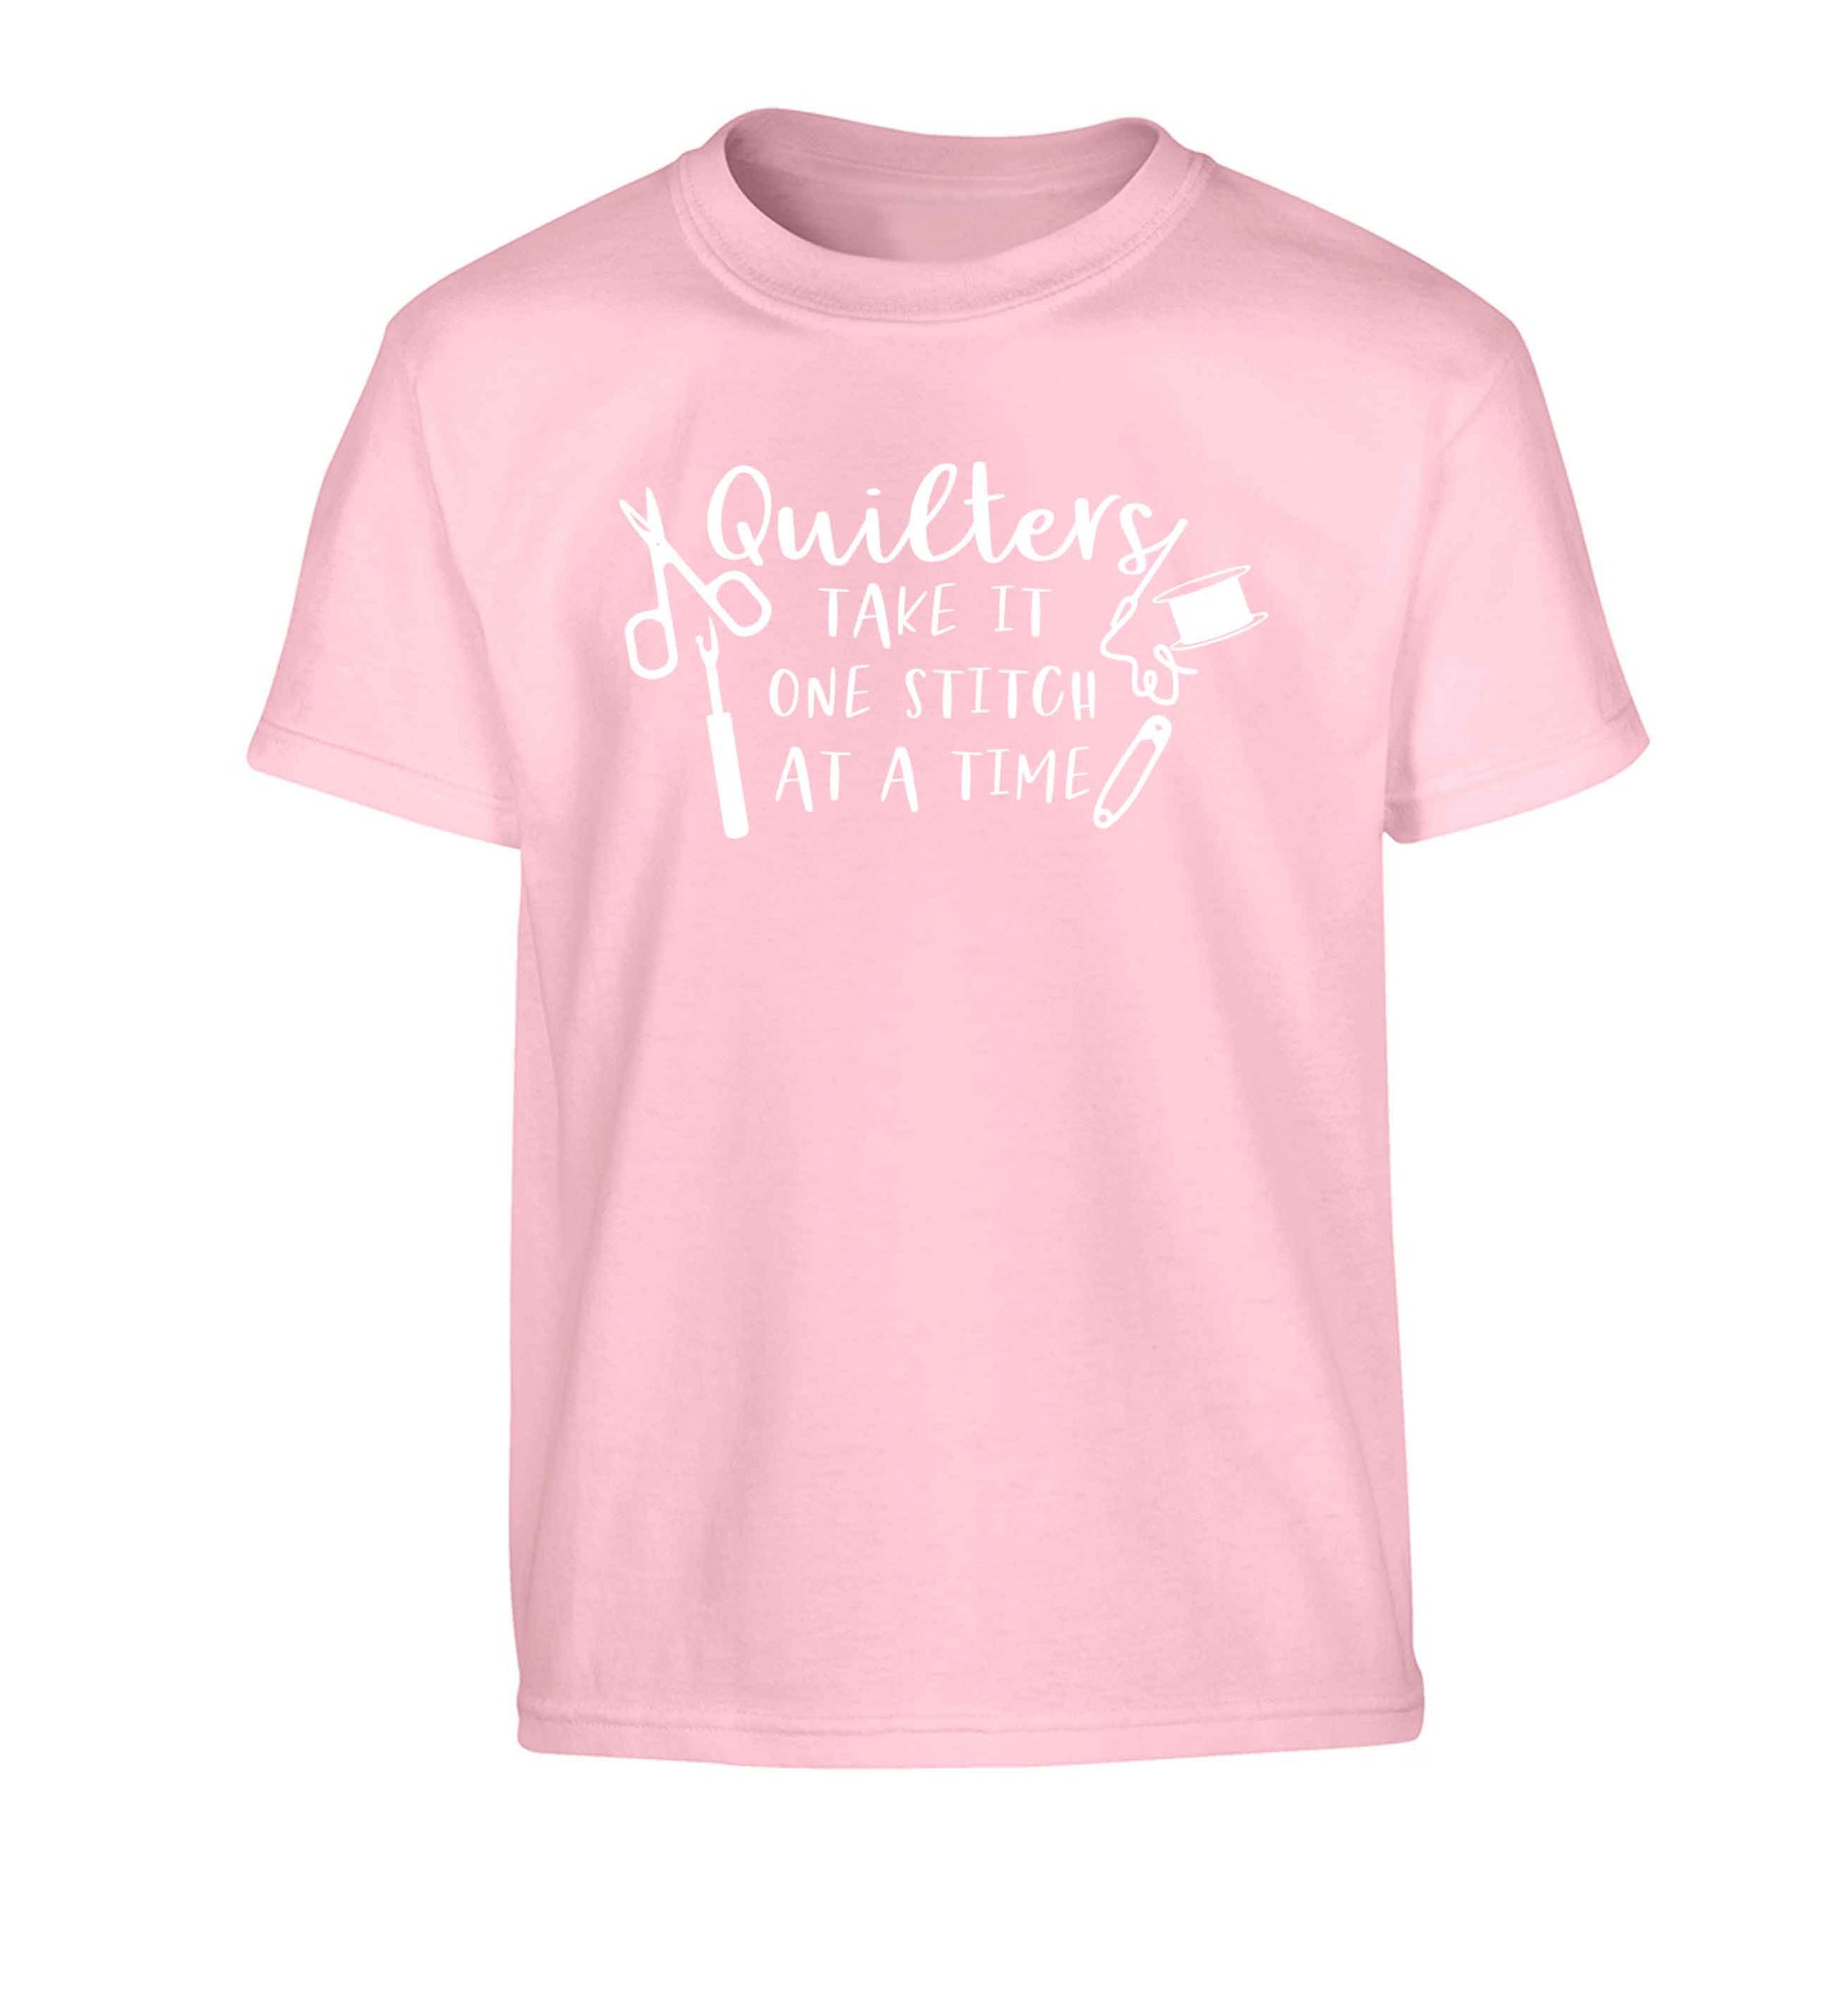 Quilters take it one stitch at a time  Children's light pink Tshirt 12-13 Years